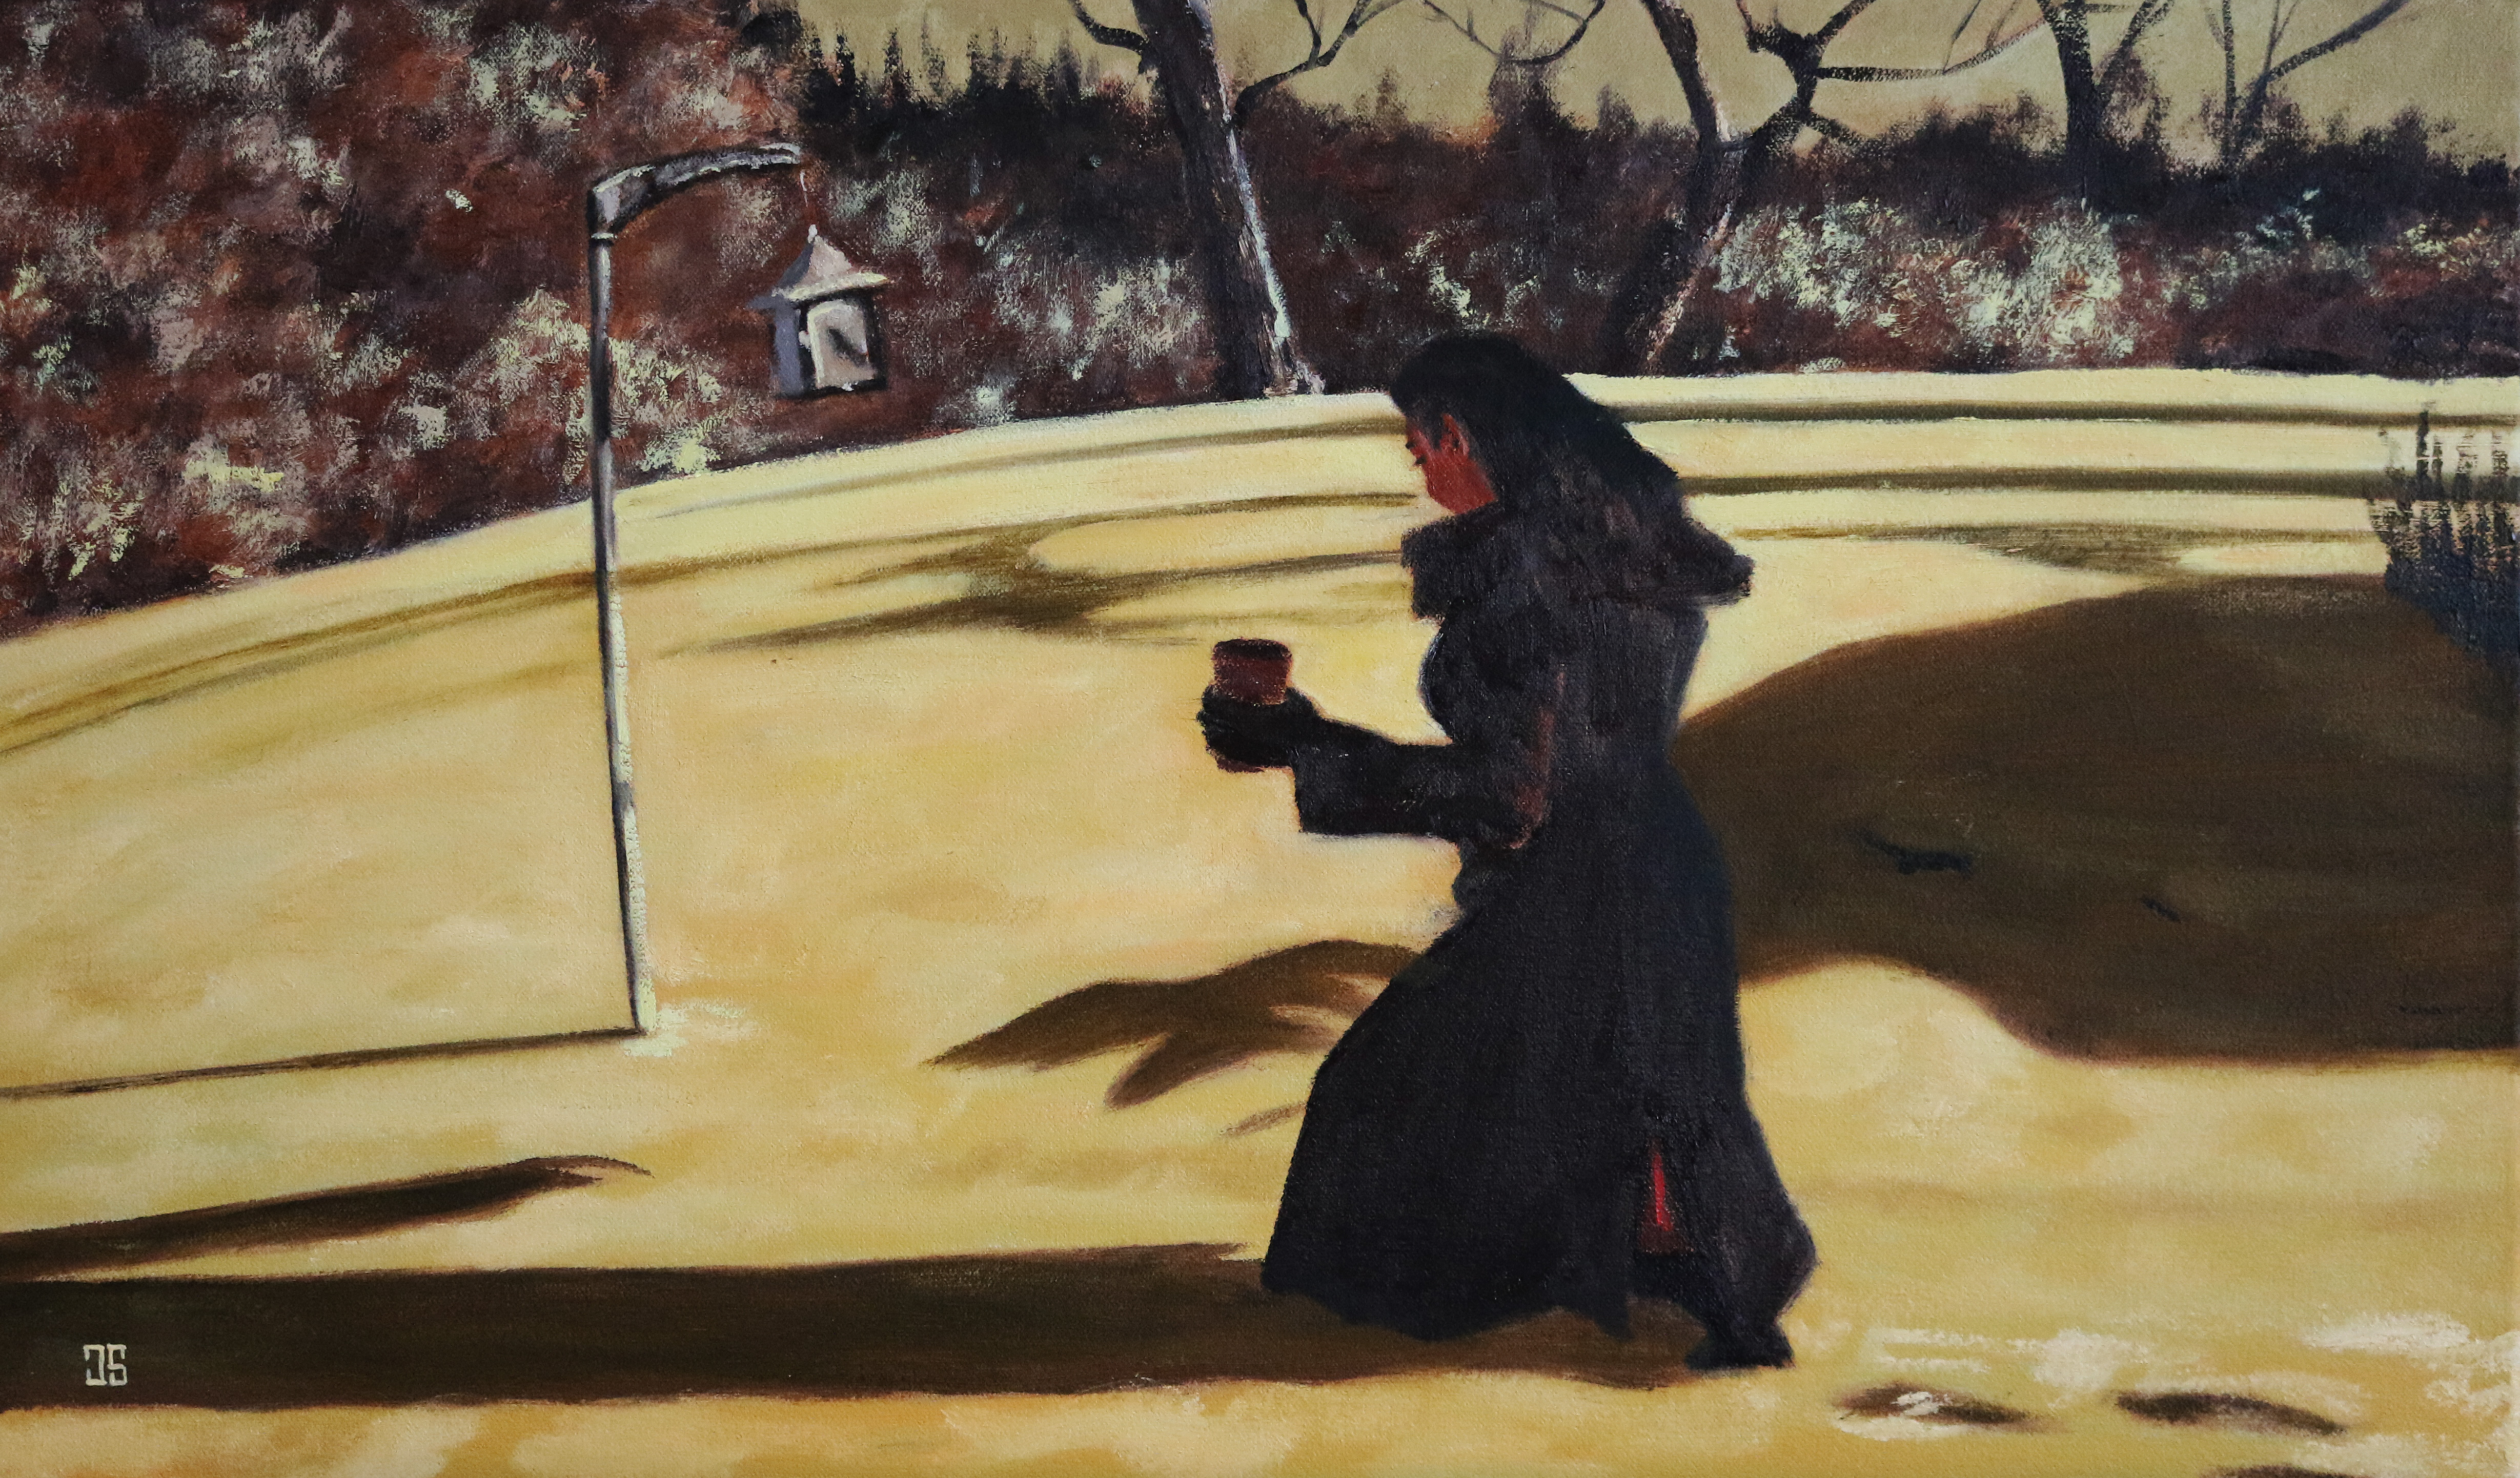 Oil painting "Feeding the Birds Midwinter" by Jeffrey Dale Starr